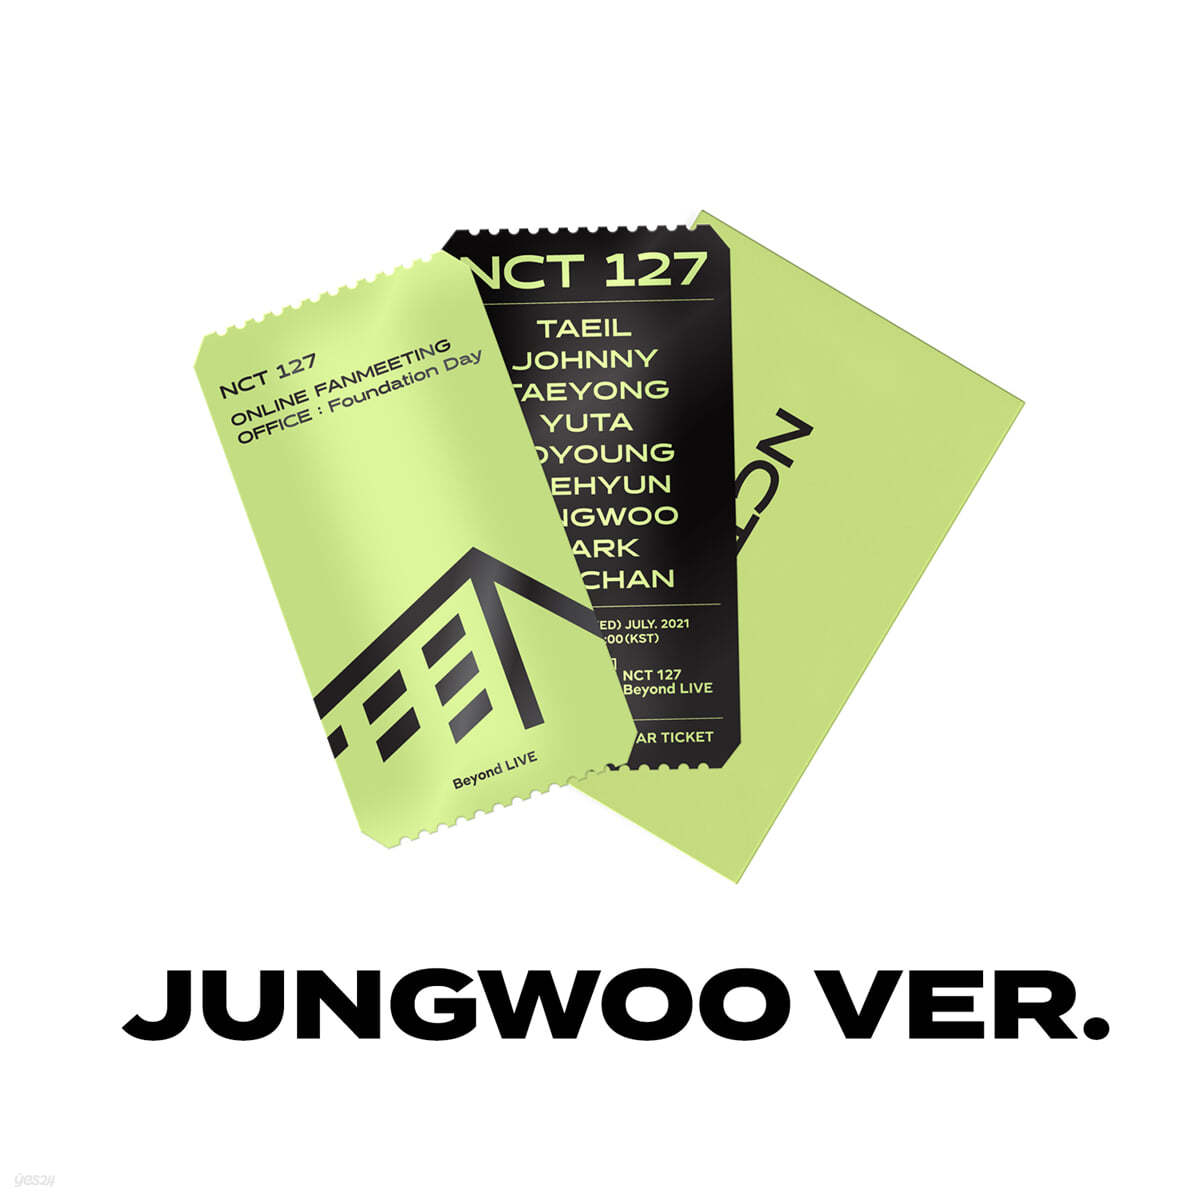 [JUNGWOO] SPECIAL AR TICKET SET Beyond LIVE - NCT 127 ONLINE FANMEETING &#39;OFFICE : Foundation Day&#39;